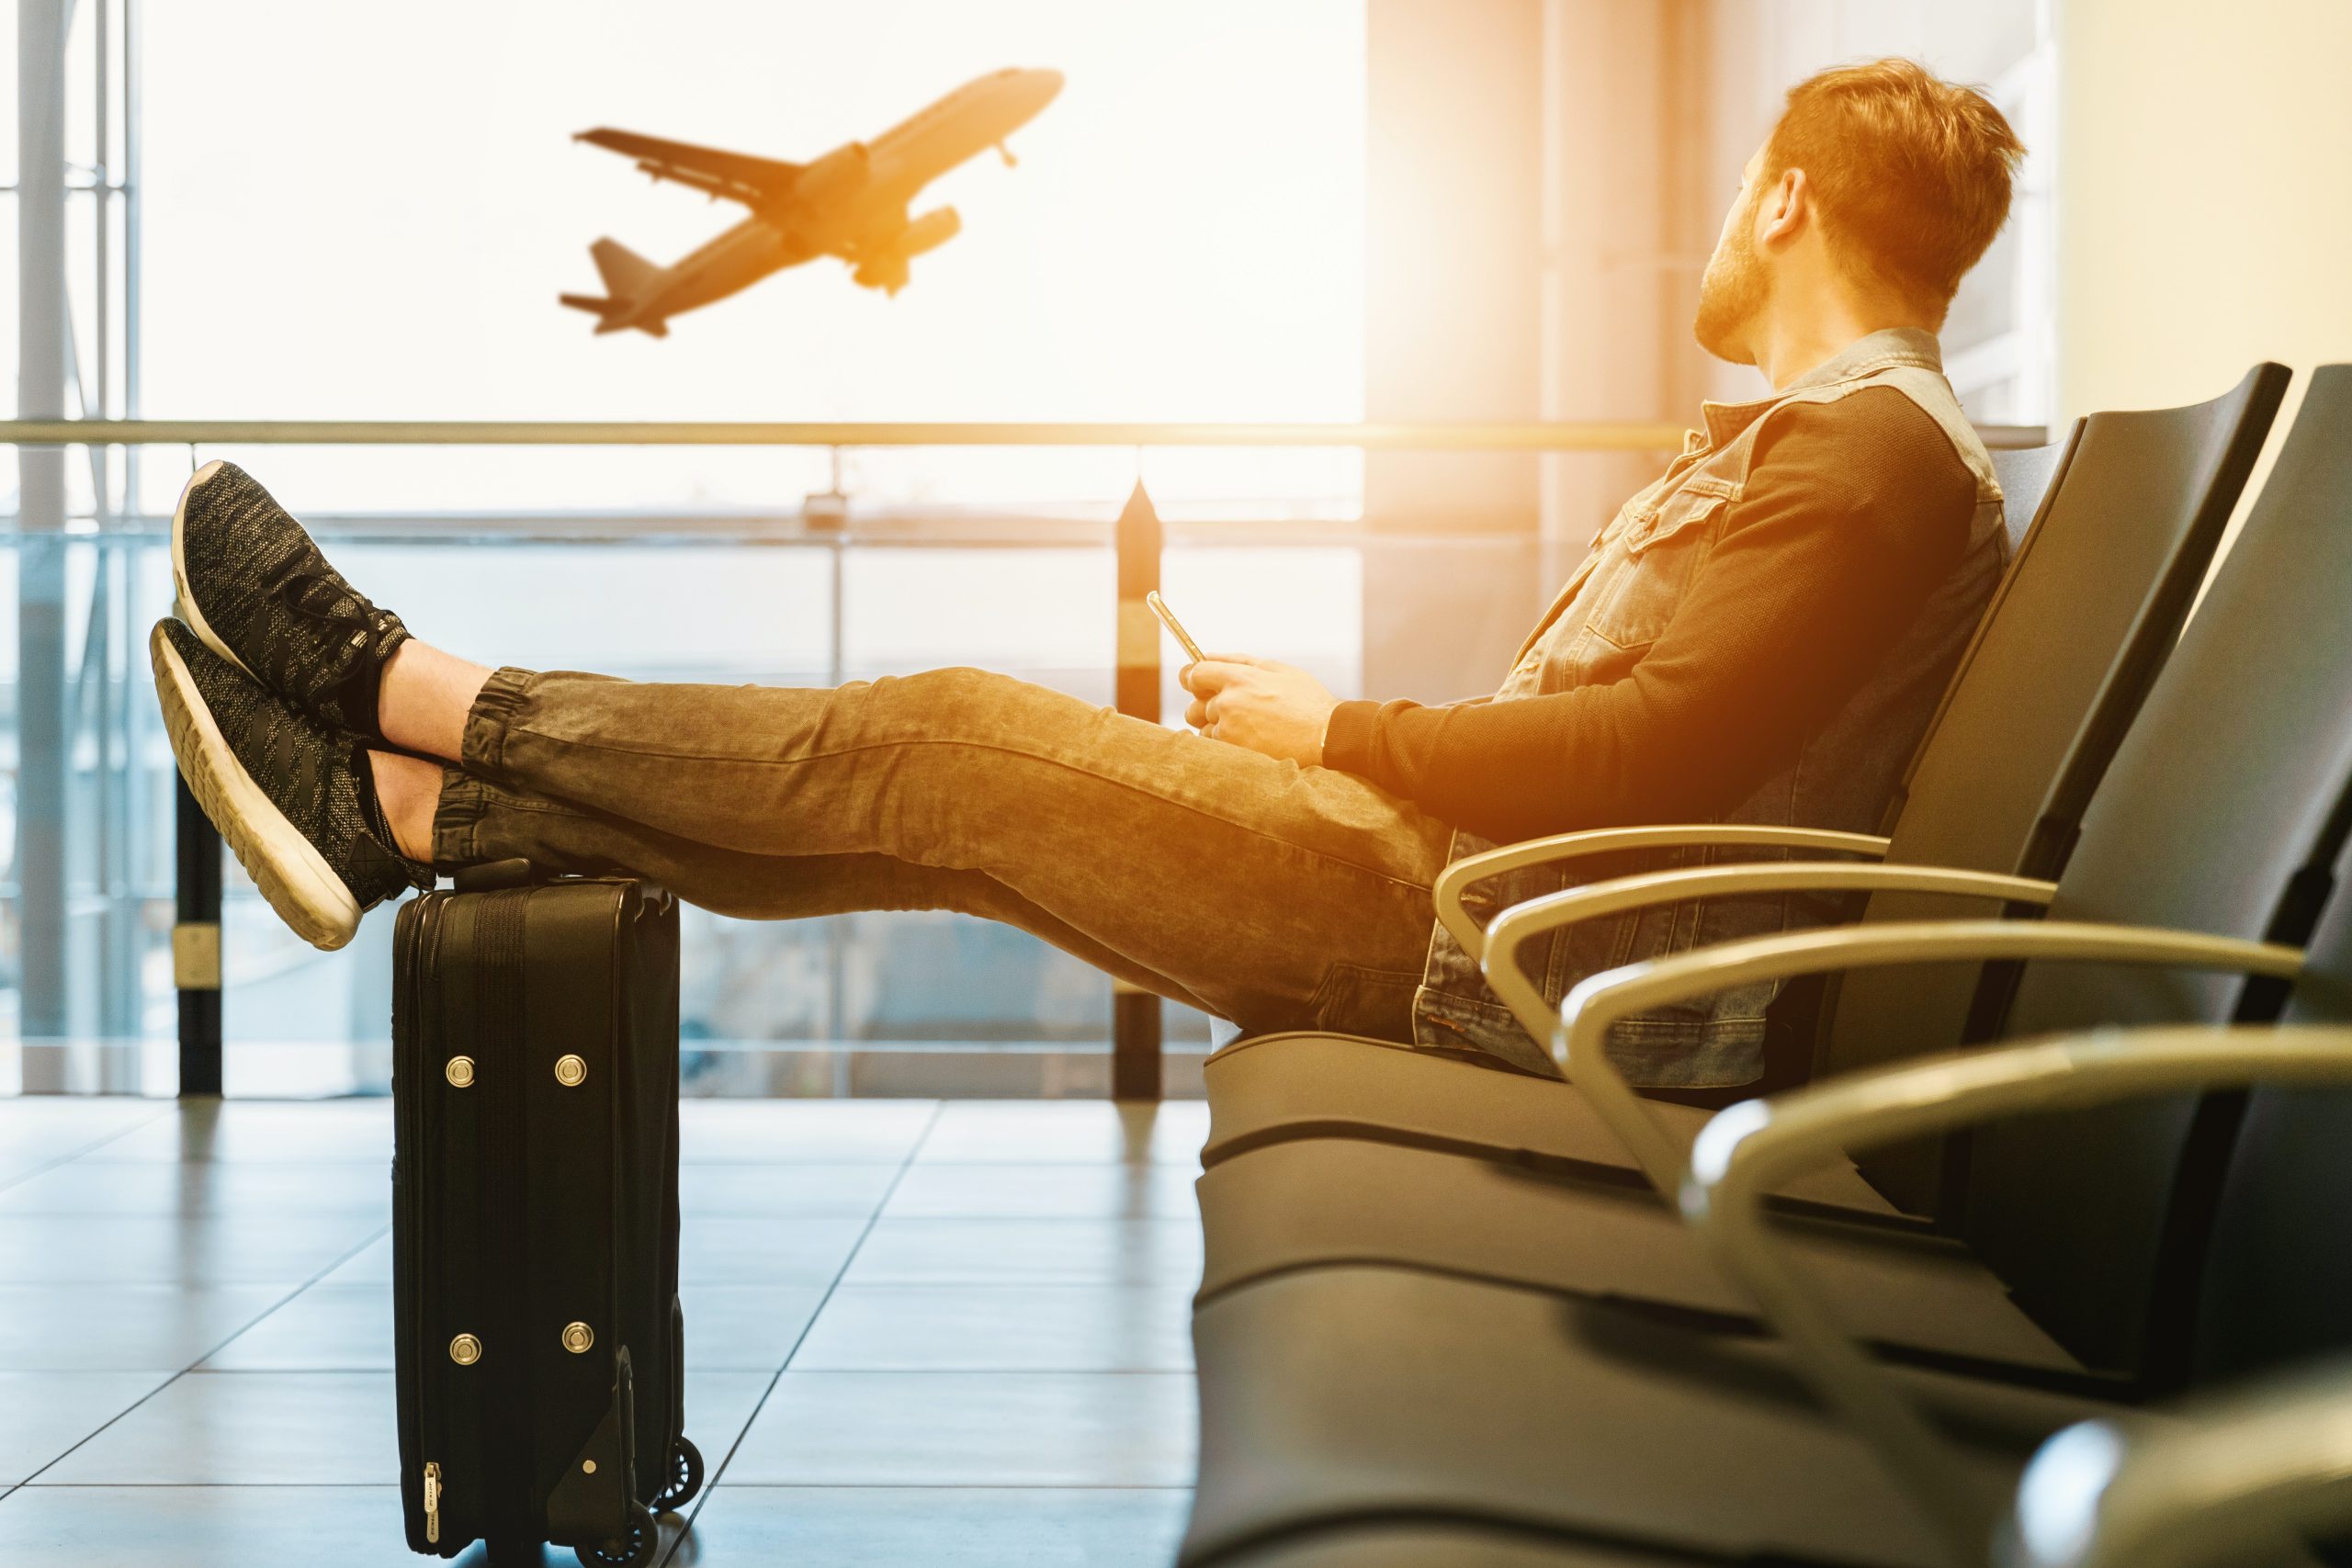 How To Avoid The Most Common Annoying Travel Inconveniences